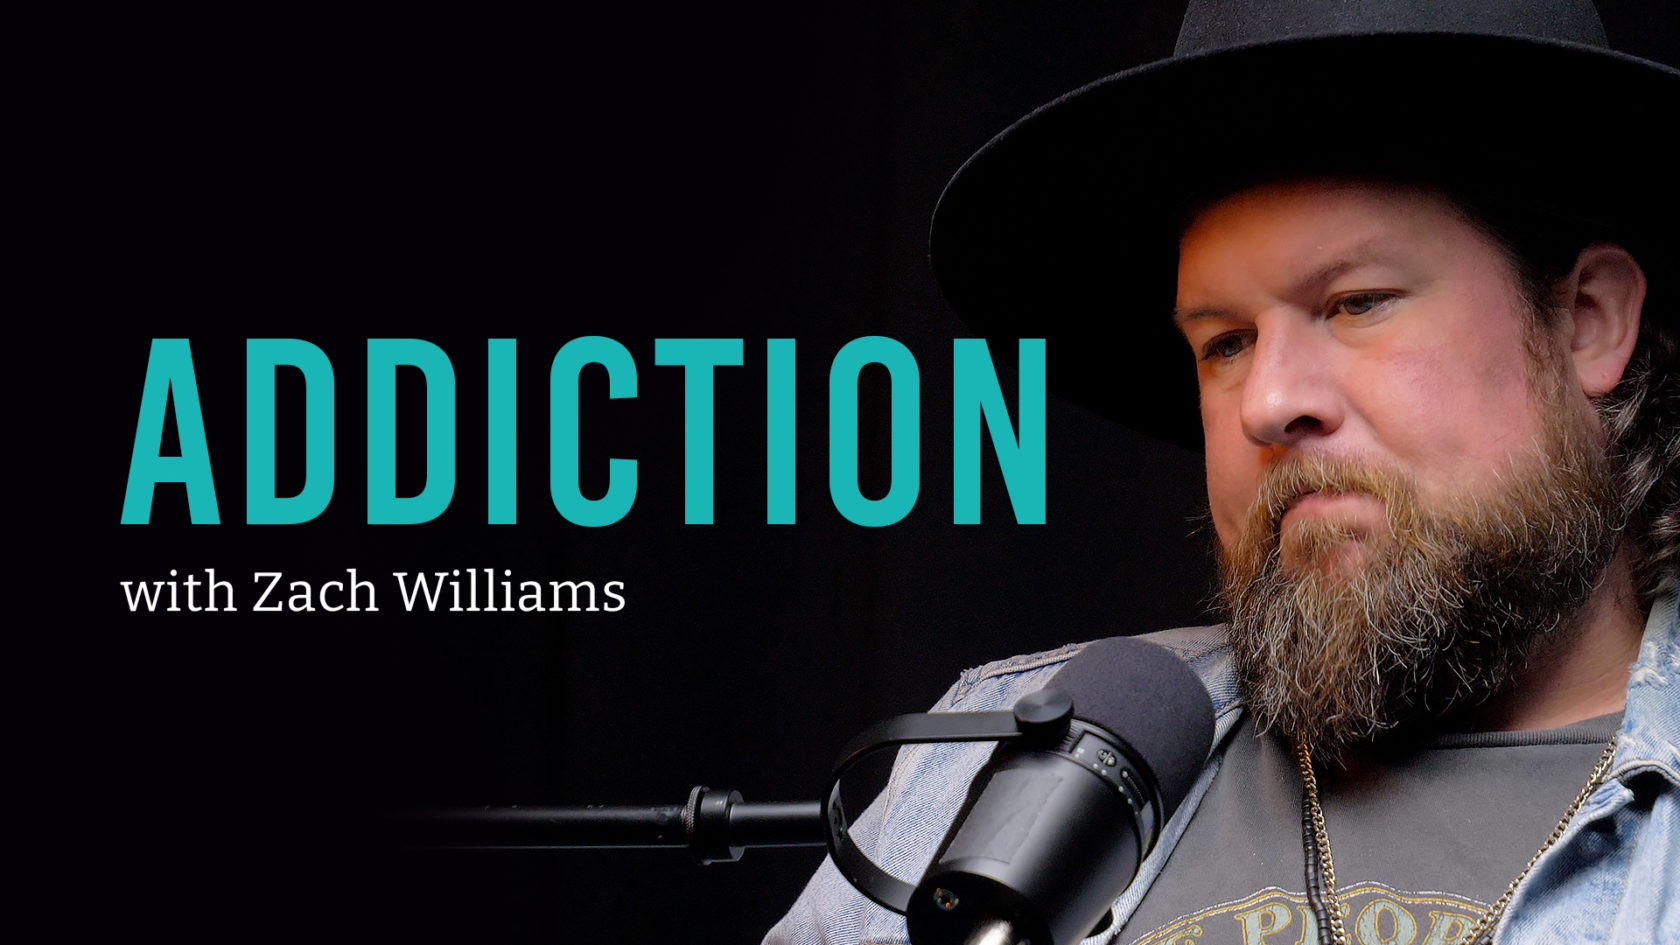 Zach Williams' addiction story and how God radically transformed his life